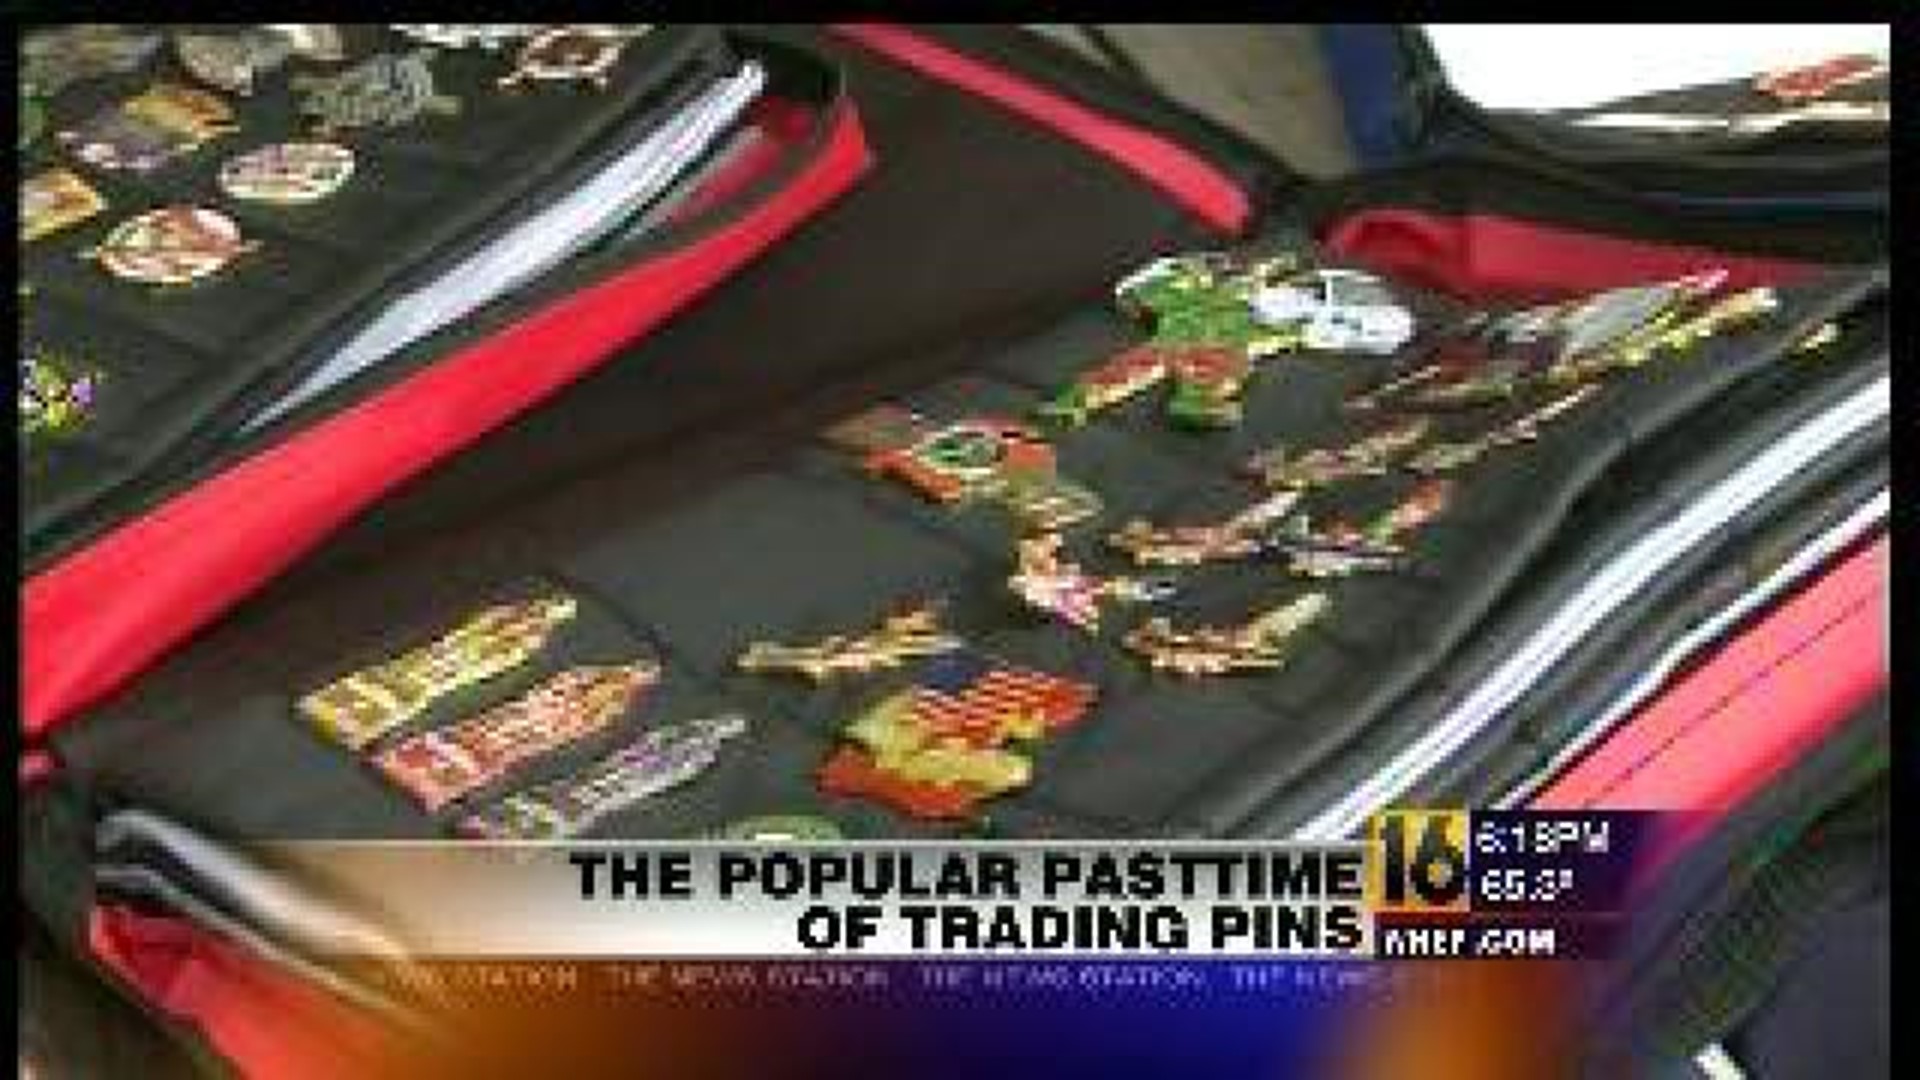 The Popular Pastime of Trading Pins